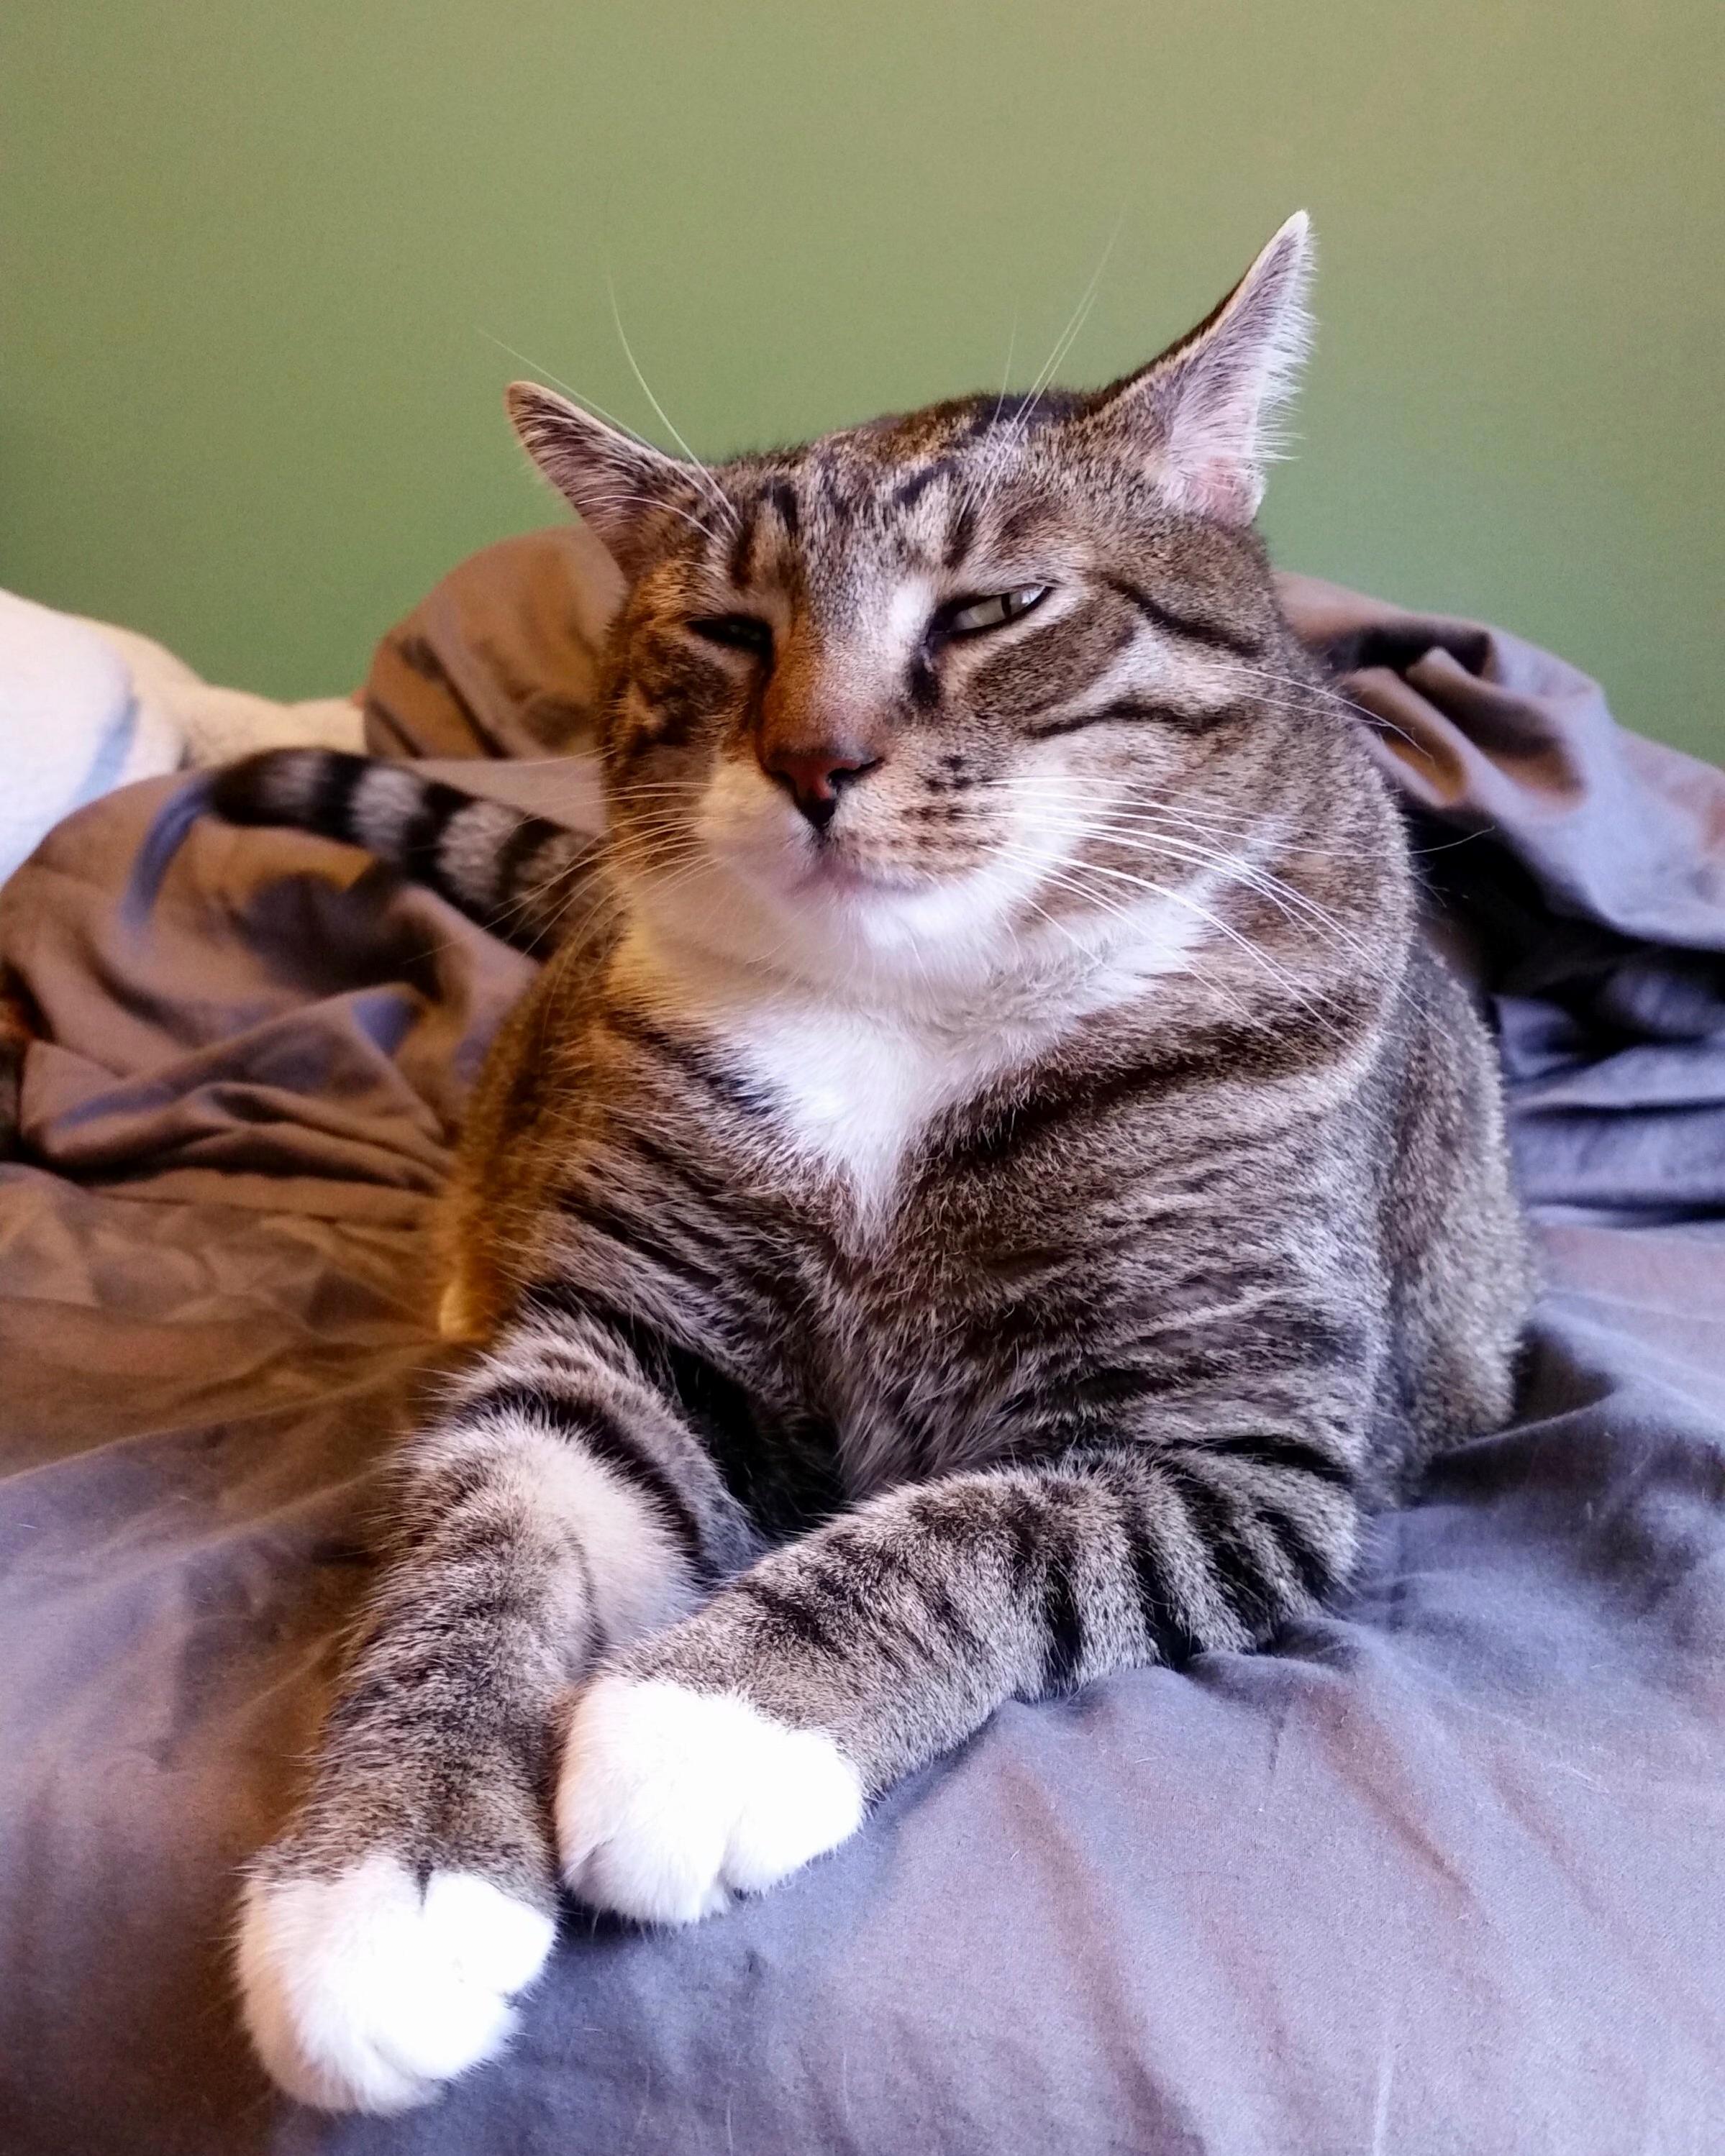 Pancake is skeptical about my request to get out of bed